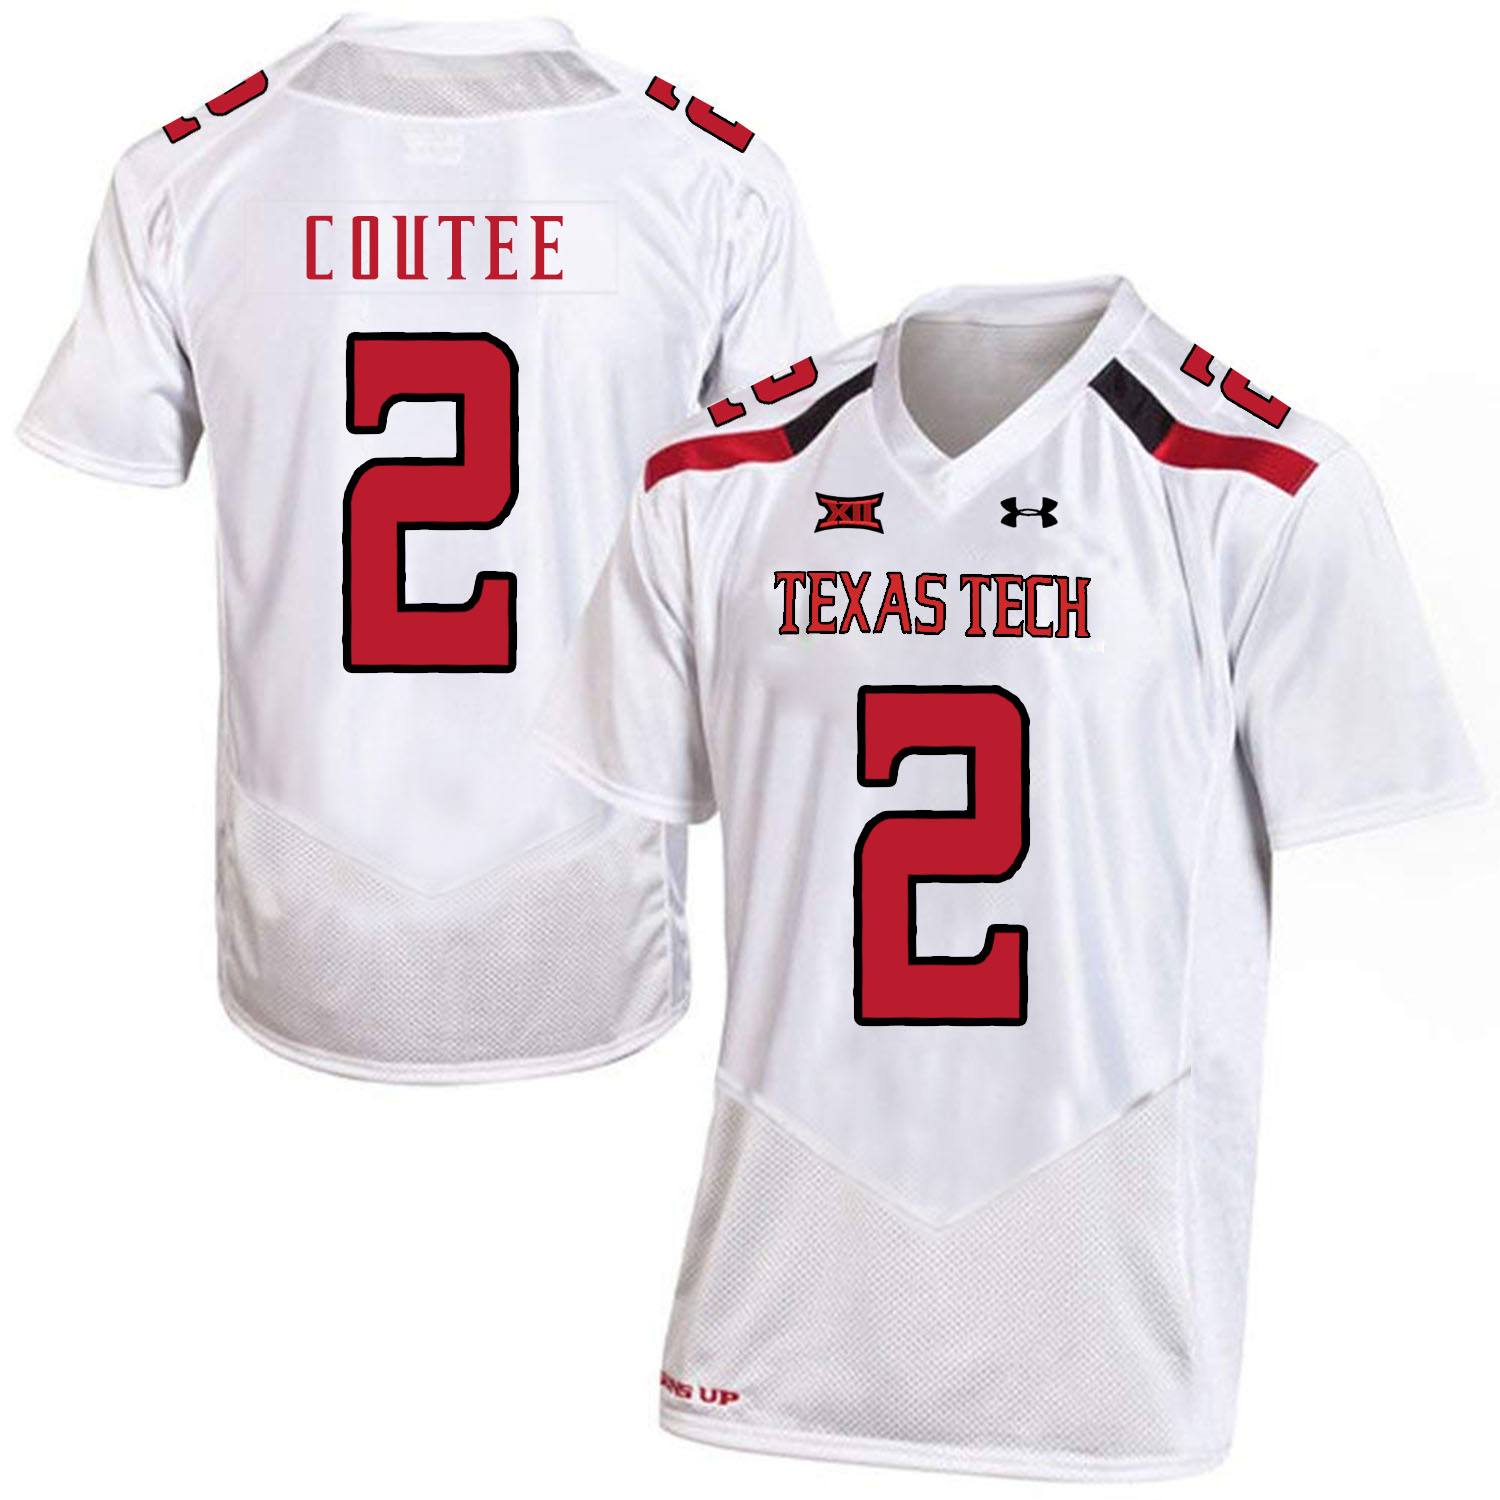 Texas Tech Red Raiders 2 Keke Coutee White College Football Jersey